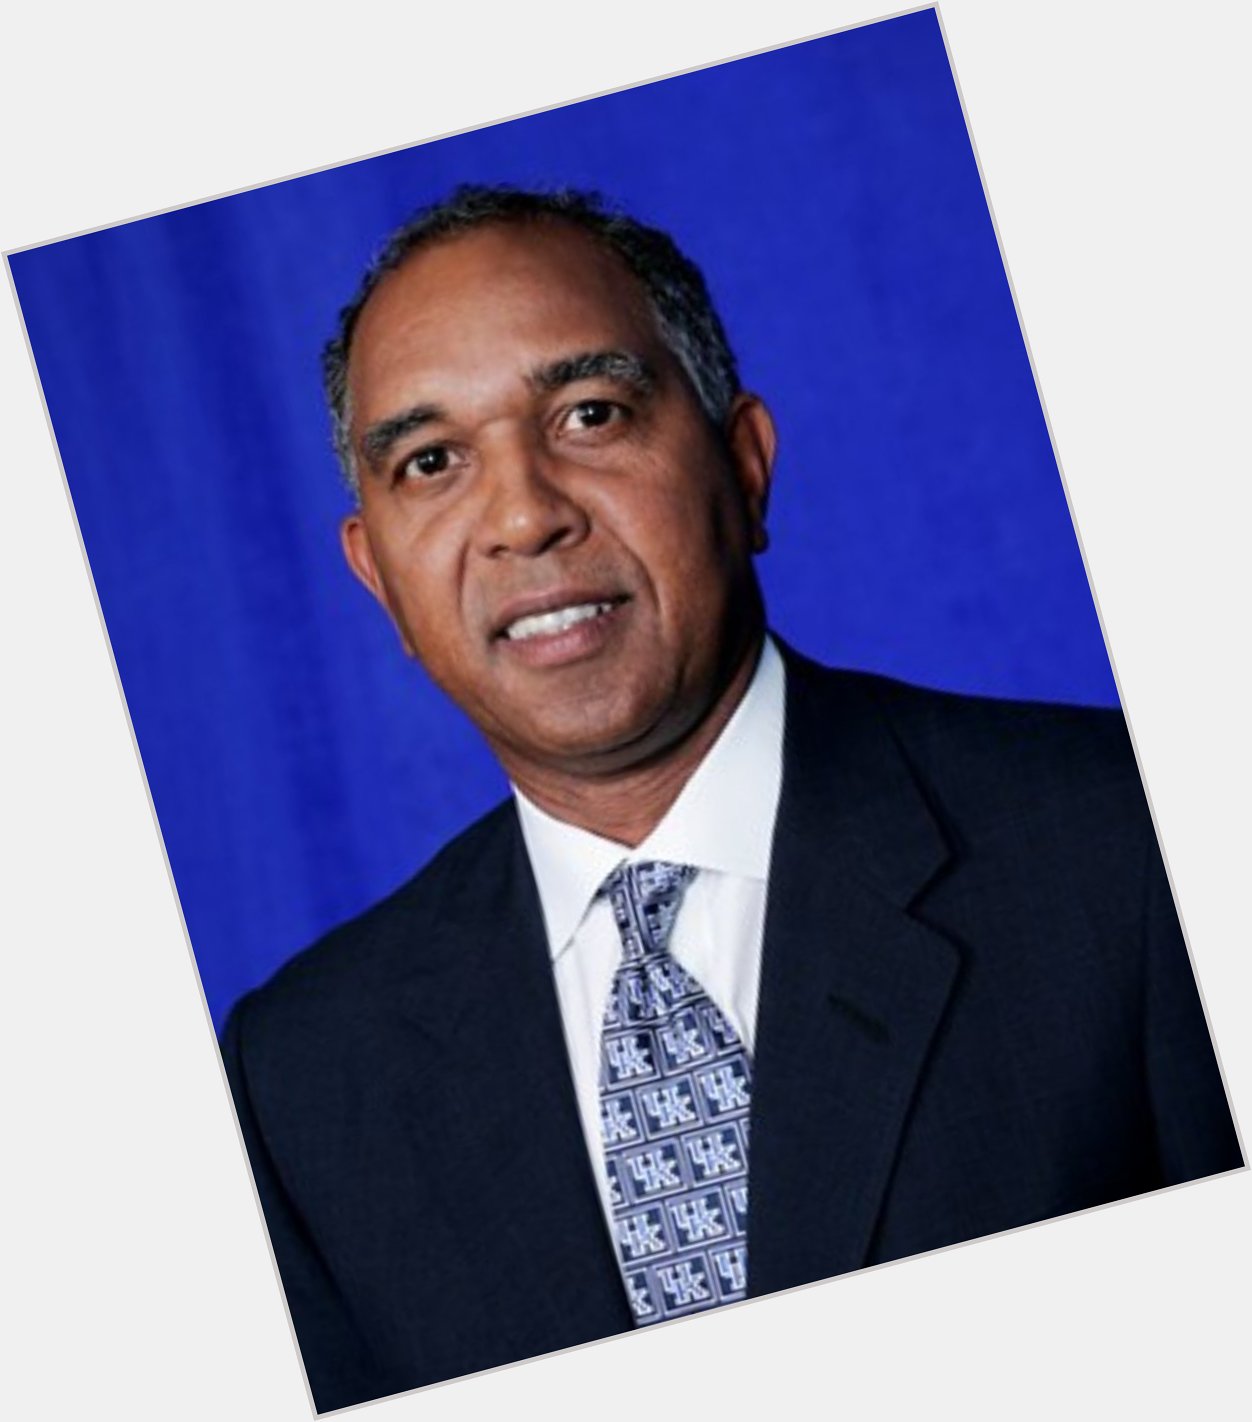 Please join us in wishing a happy birthday to Tubby Smith - Class of 2008 